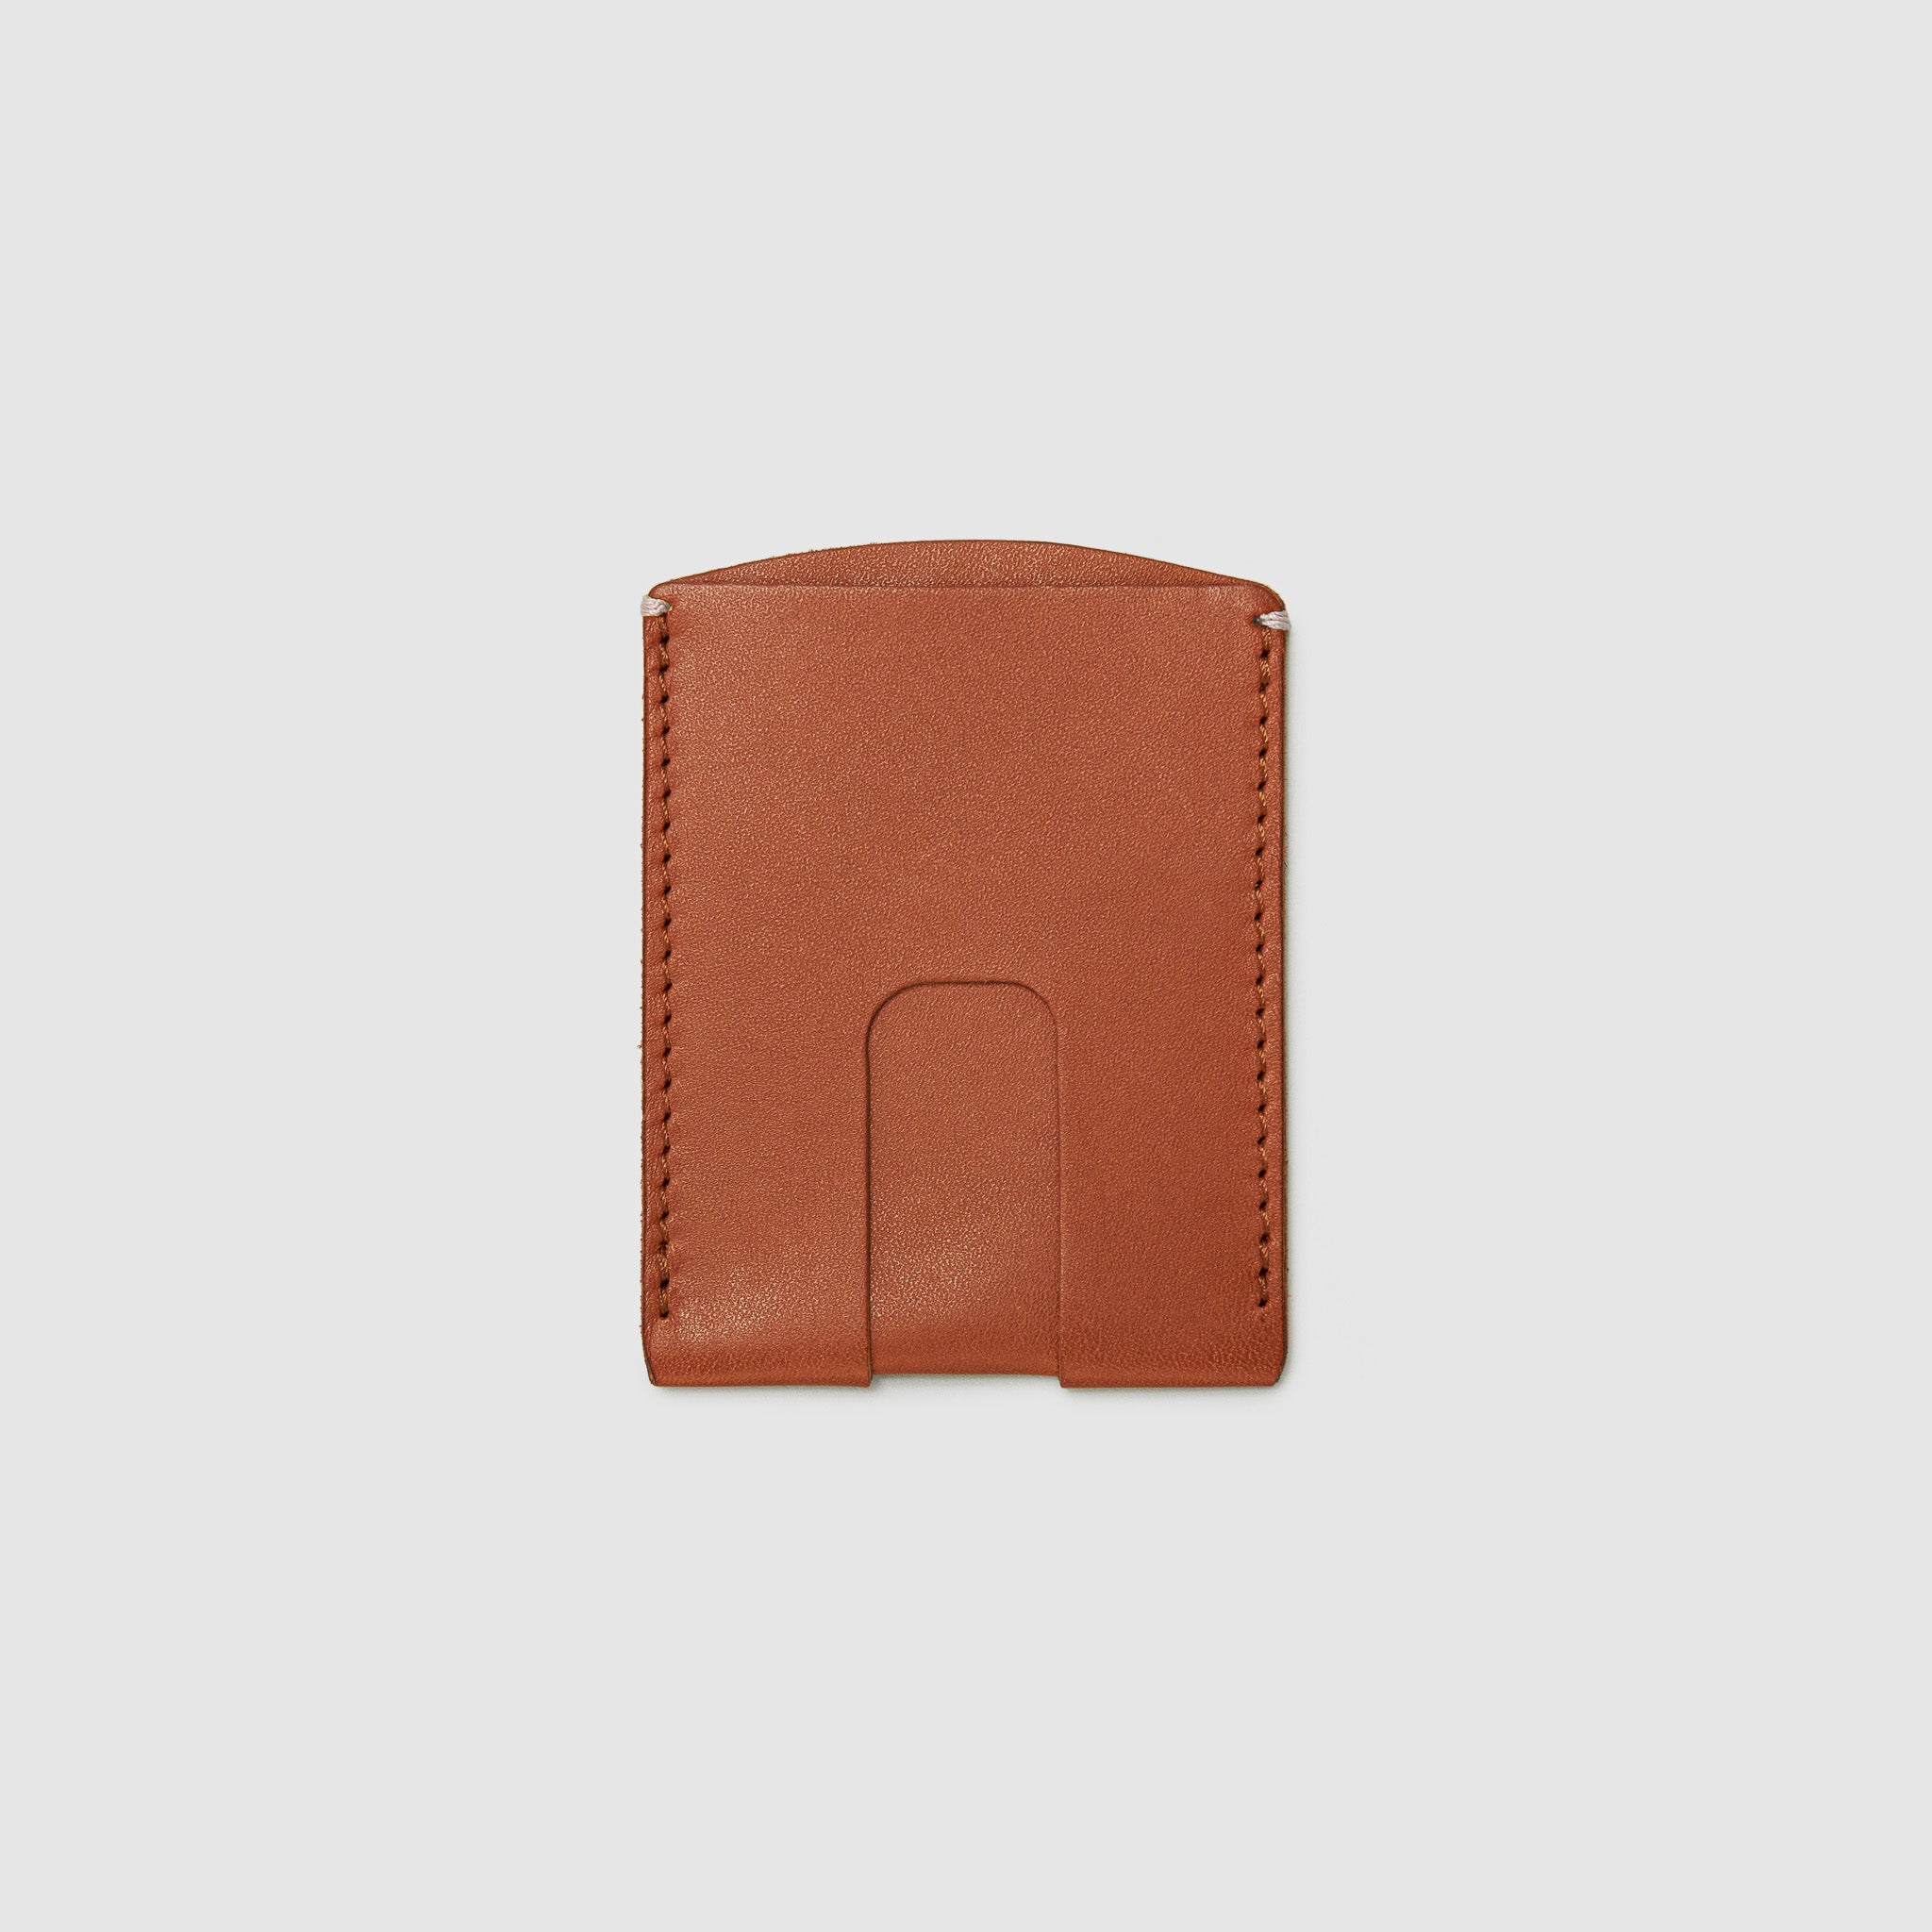 Anson Calder Card Holder Wallet french calfskin leather with cash slot _cognac